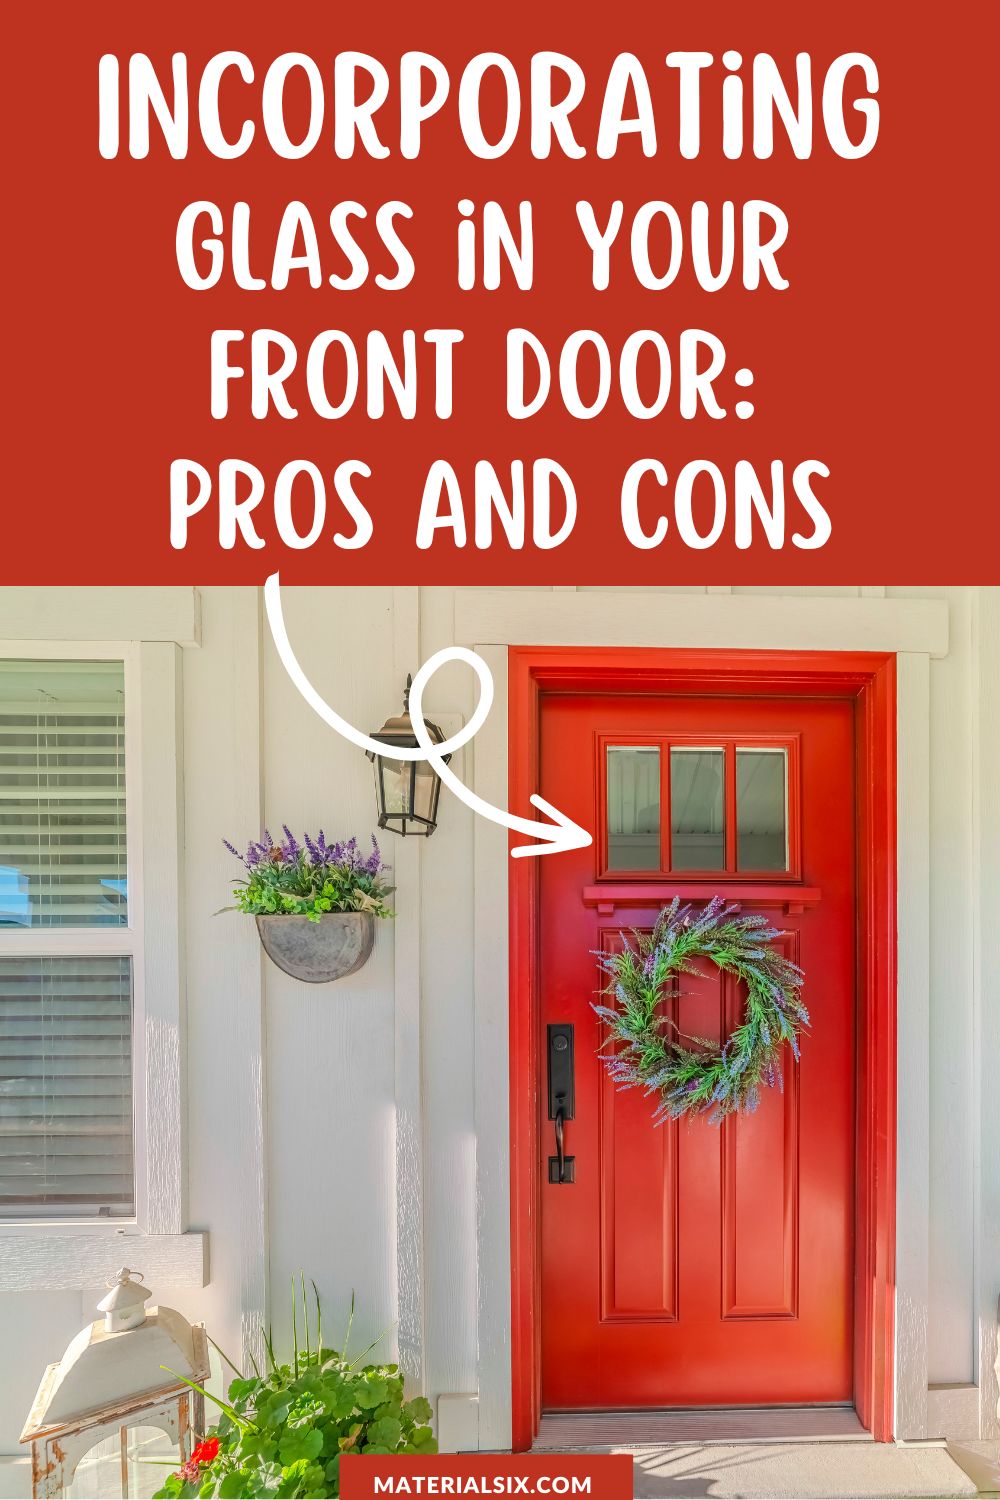 Incorporating Glass in Your Front Door Pros and Cons